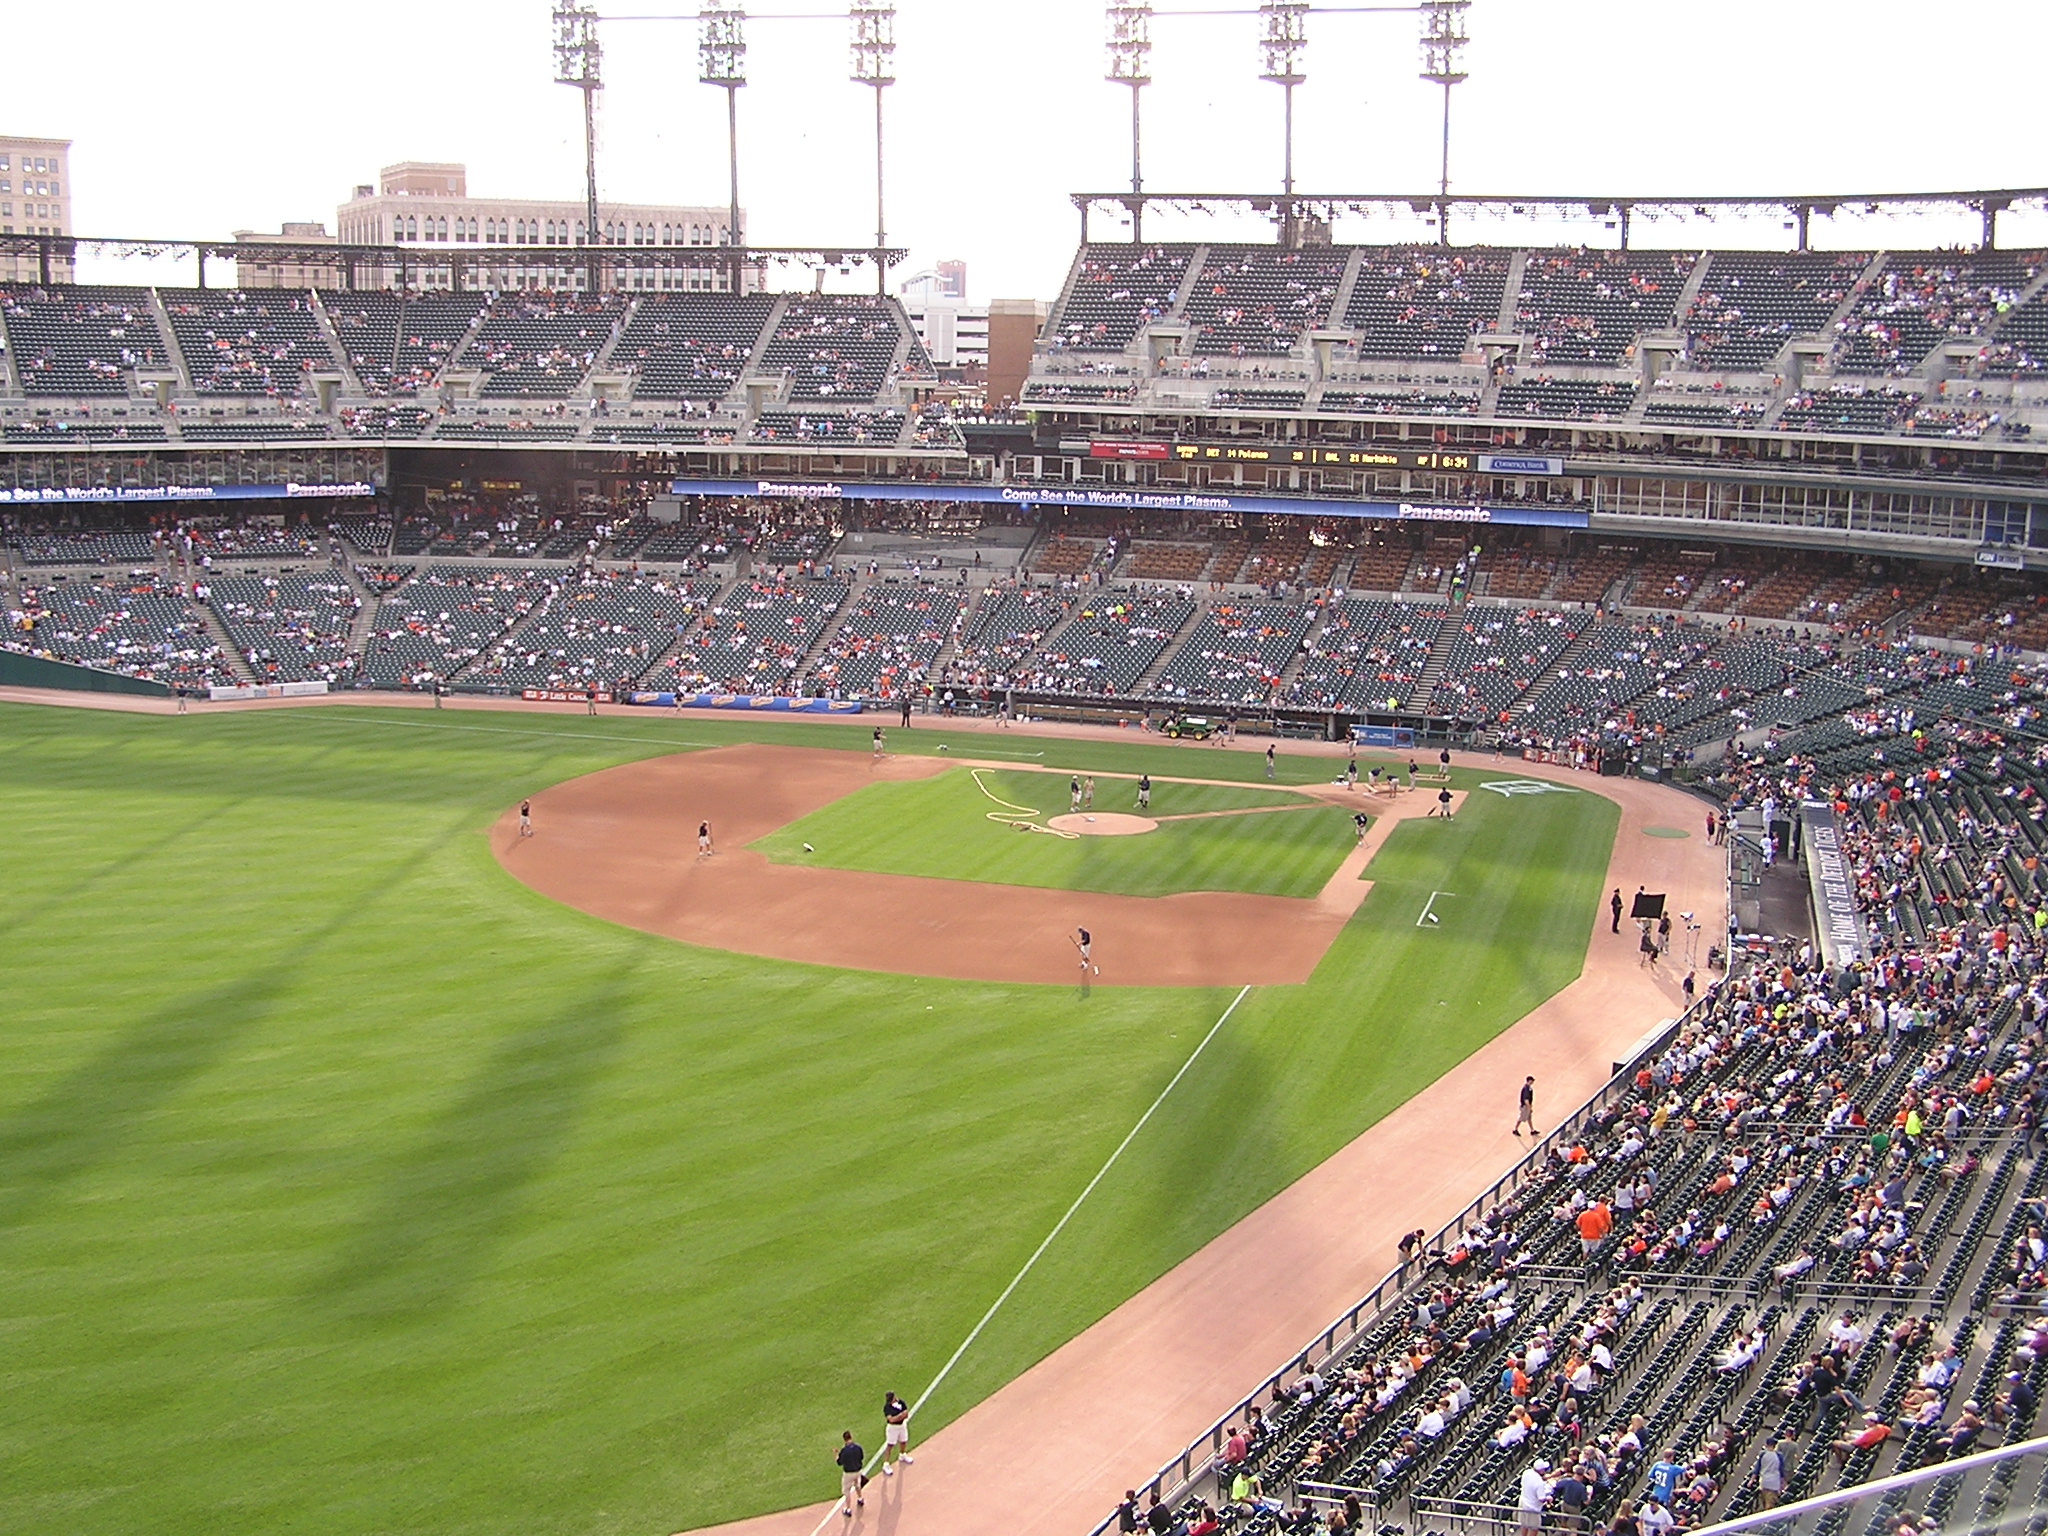 Looking in from Left Field, Comerica Park